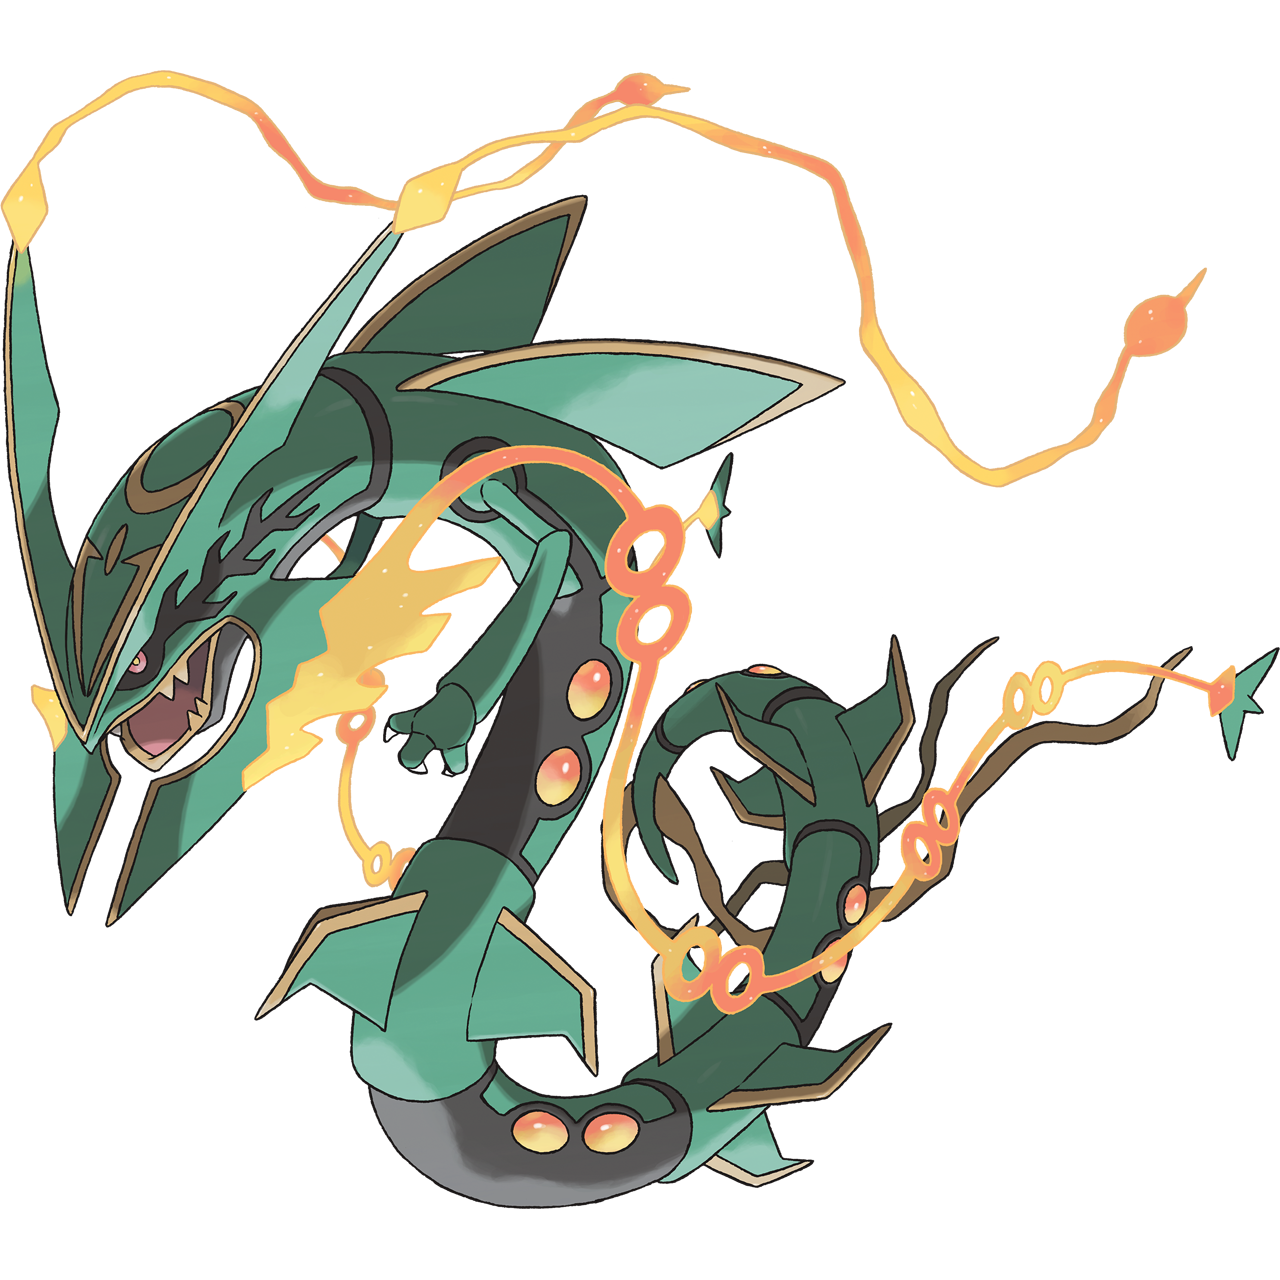 Shiny Mega Rayquaza Appears in New Trailer for Pokémon Omega Ruby and Alpha  Sapphire